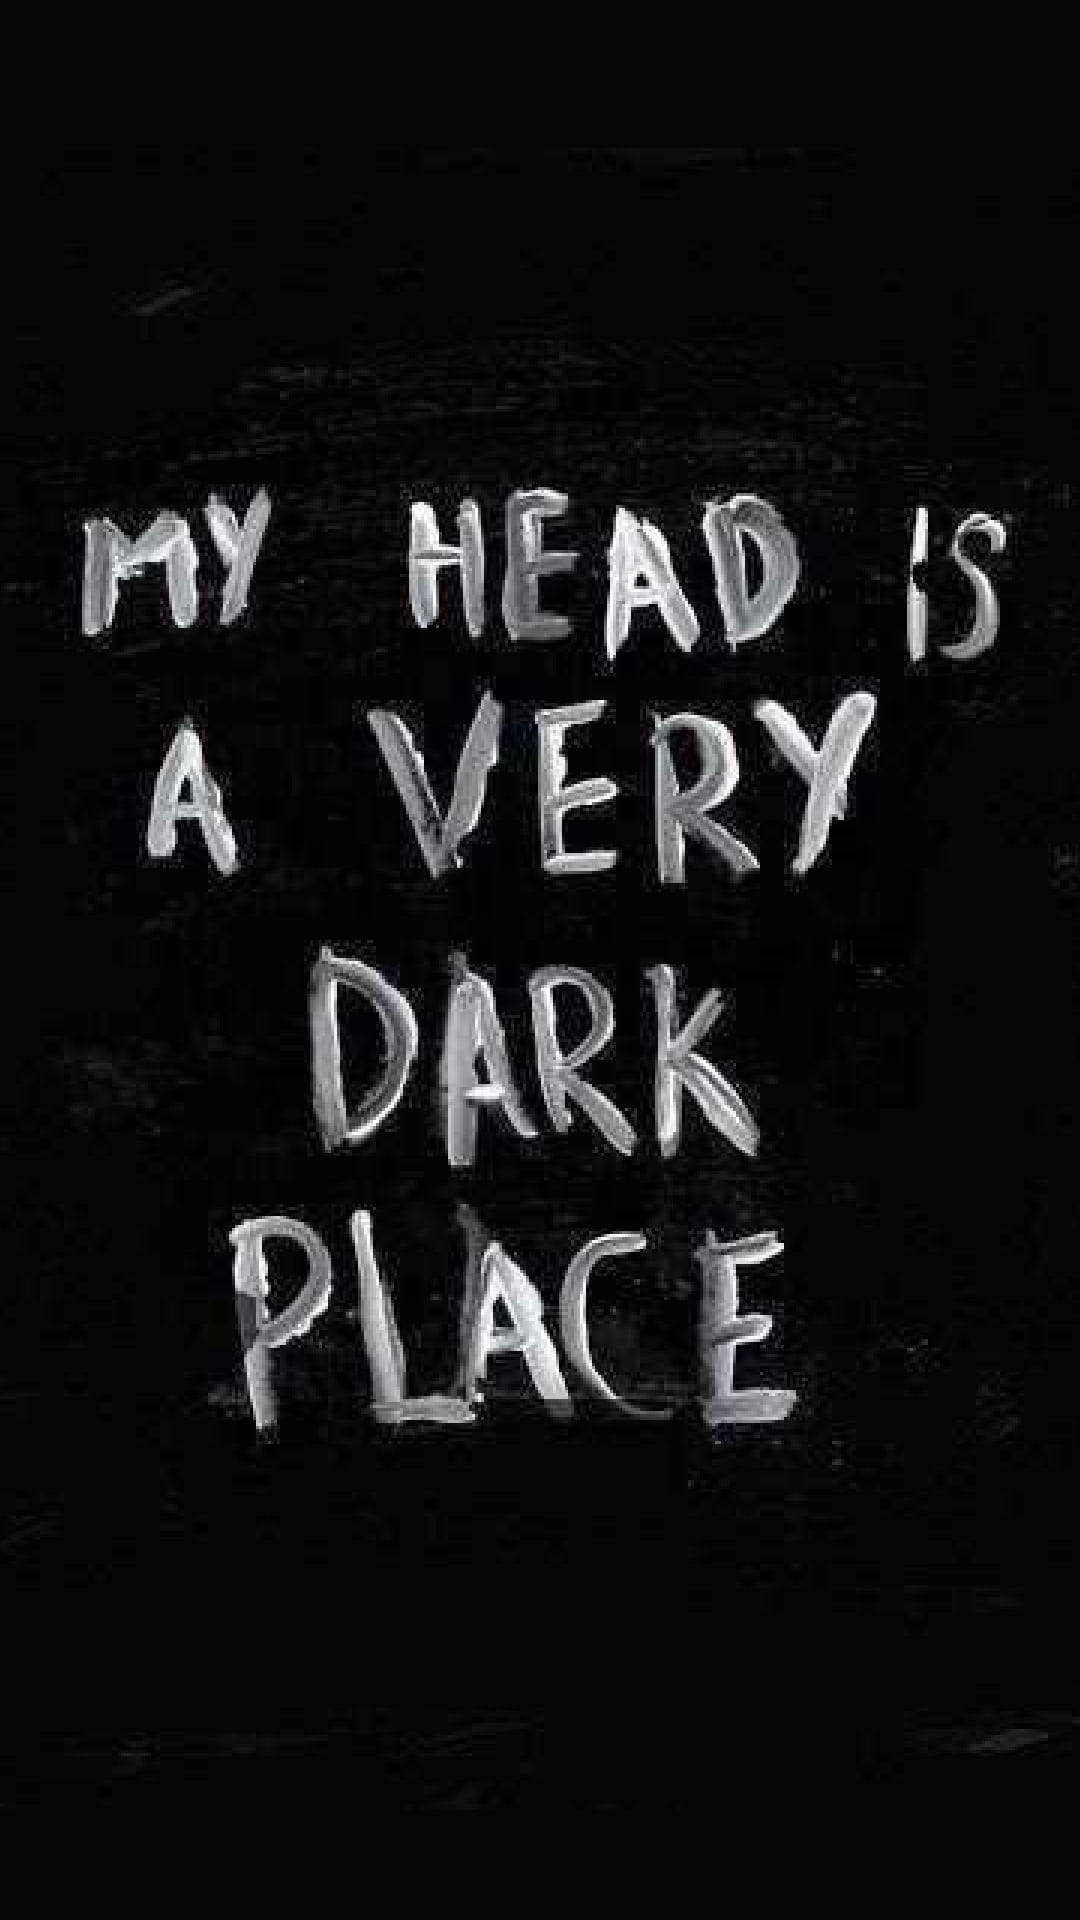 My head is a very dark place - Depression, depressing